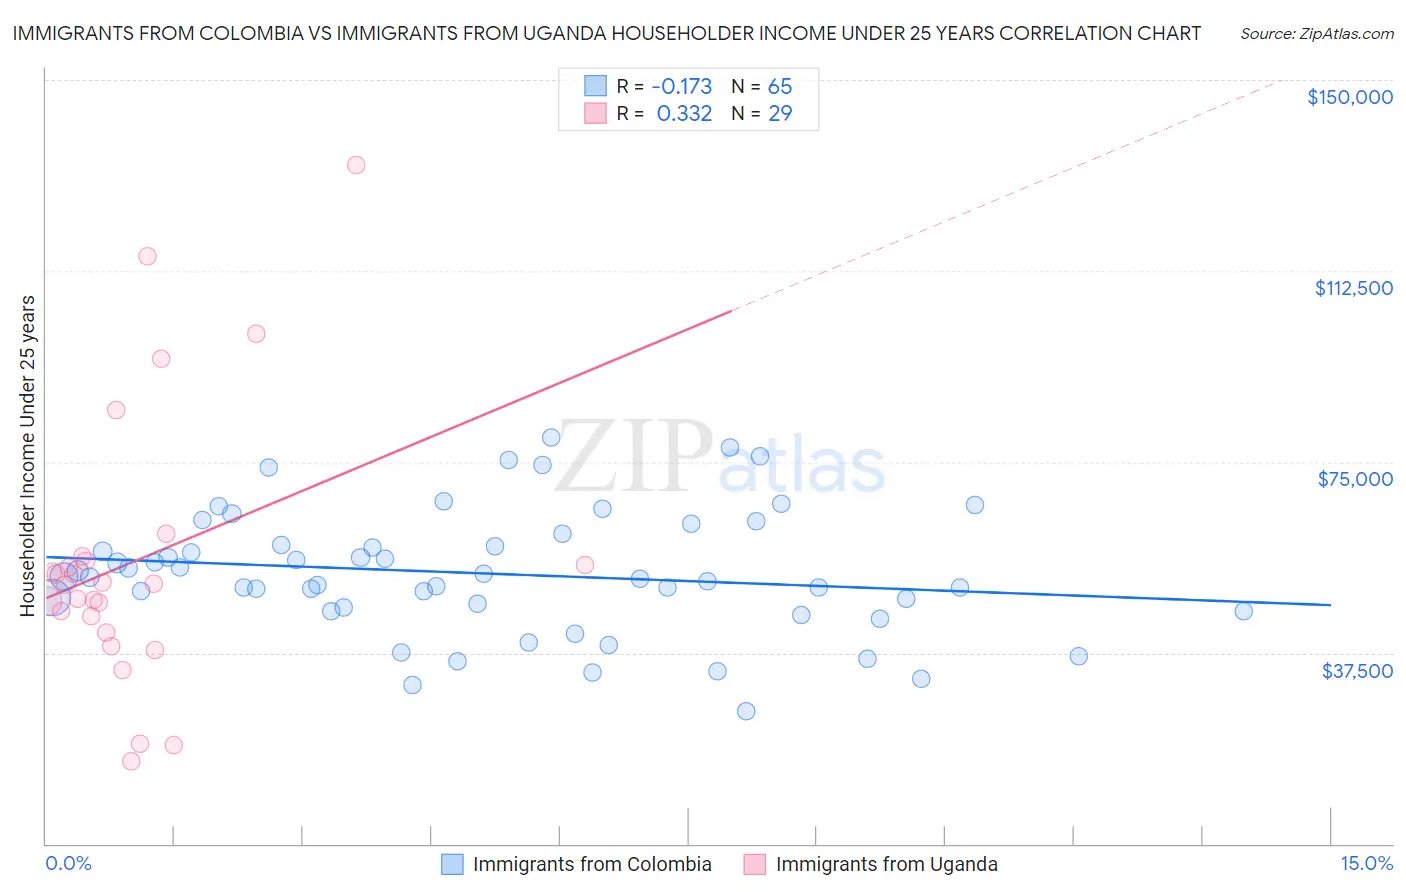 Immigrants from Colombia vs Immigrants from Uganda Householder Income Under 25 years